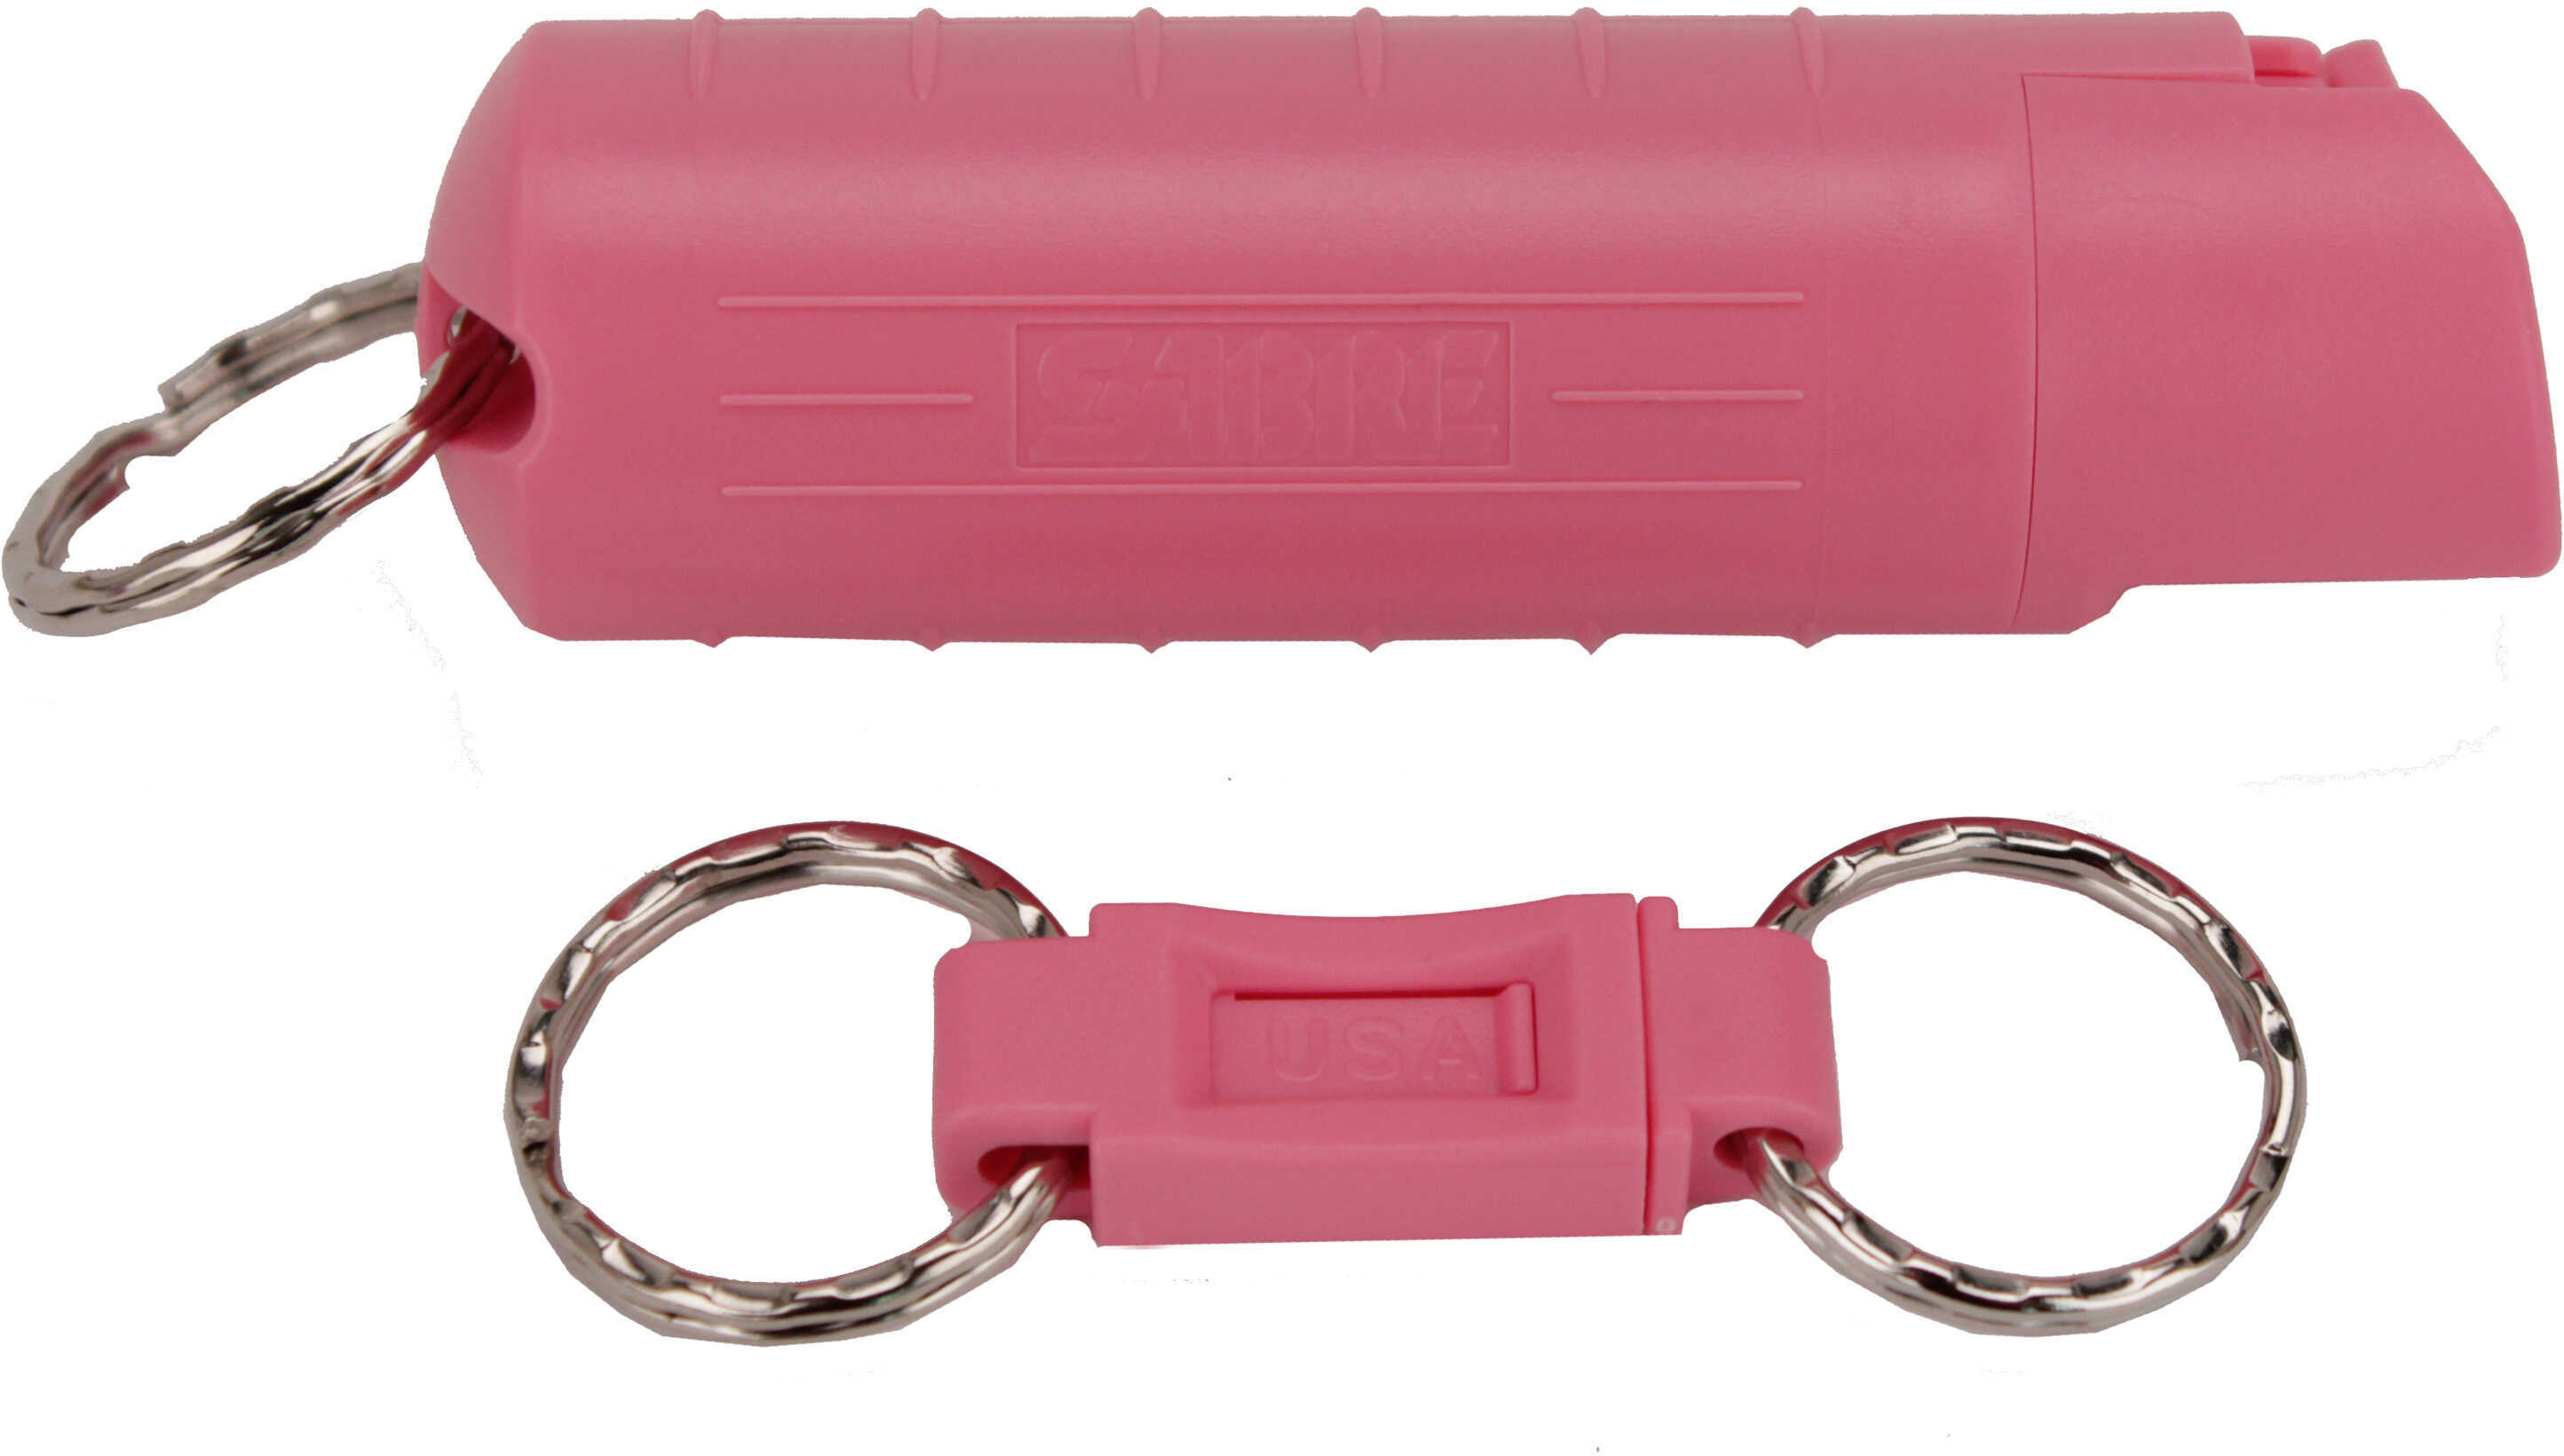 Sabre 3-in-1 Key Chain Pepper Spray Pink Hardcase with Quick Release Key Ring Model: HC-14-PK